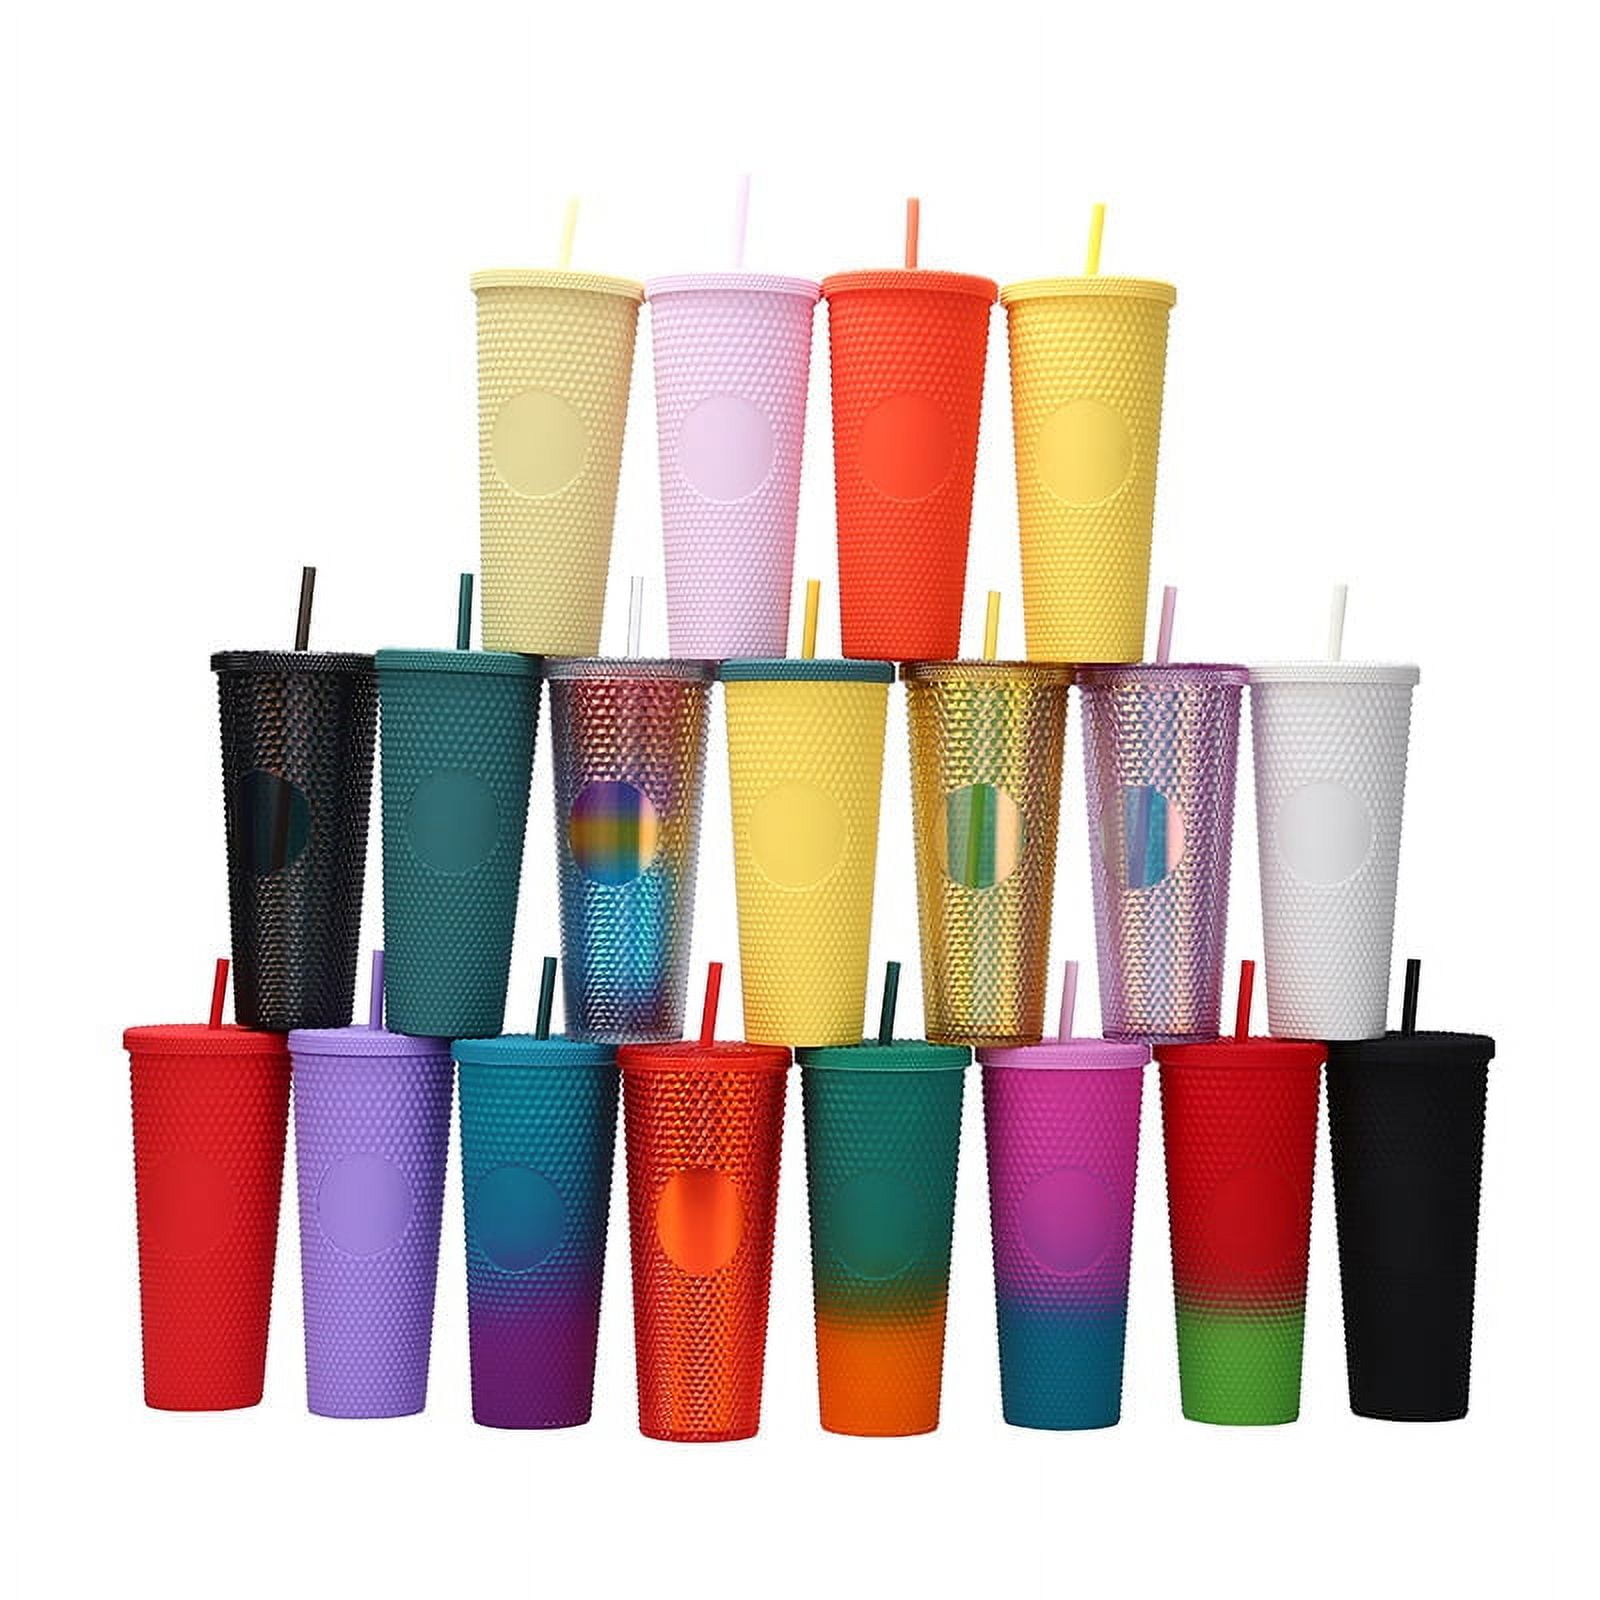 Wholesale Lot of 20 Blank Tumblers by Spiker USA, Double Walled Plastic  Cup, Travel Mug Snap on Lid Straw, BPA Free, Made in USA, 7 colors ·  VineandWhimsyDesigns · Online Store Powered by Storenvy